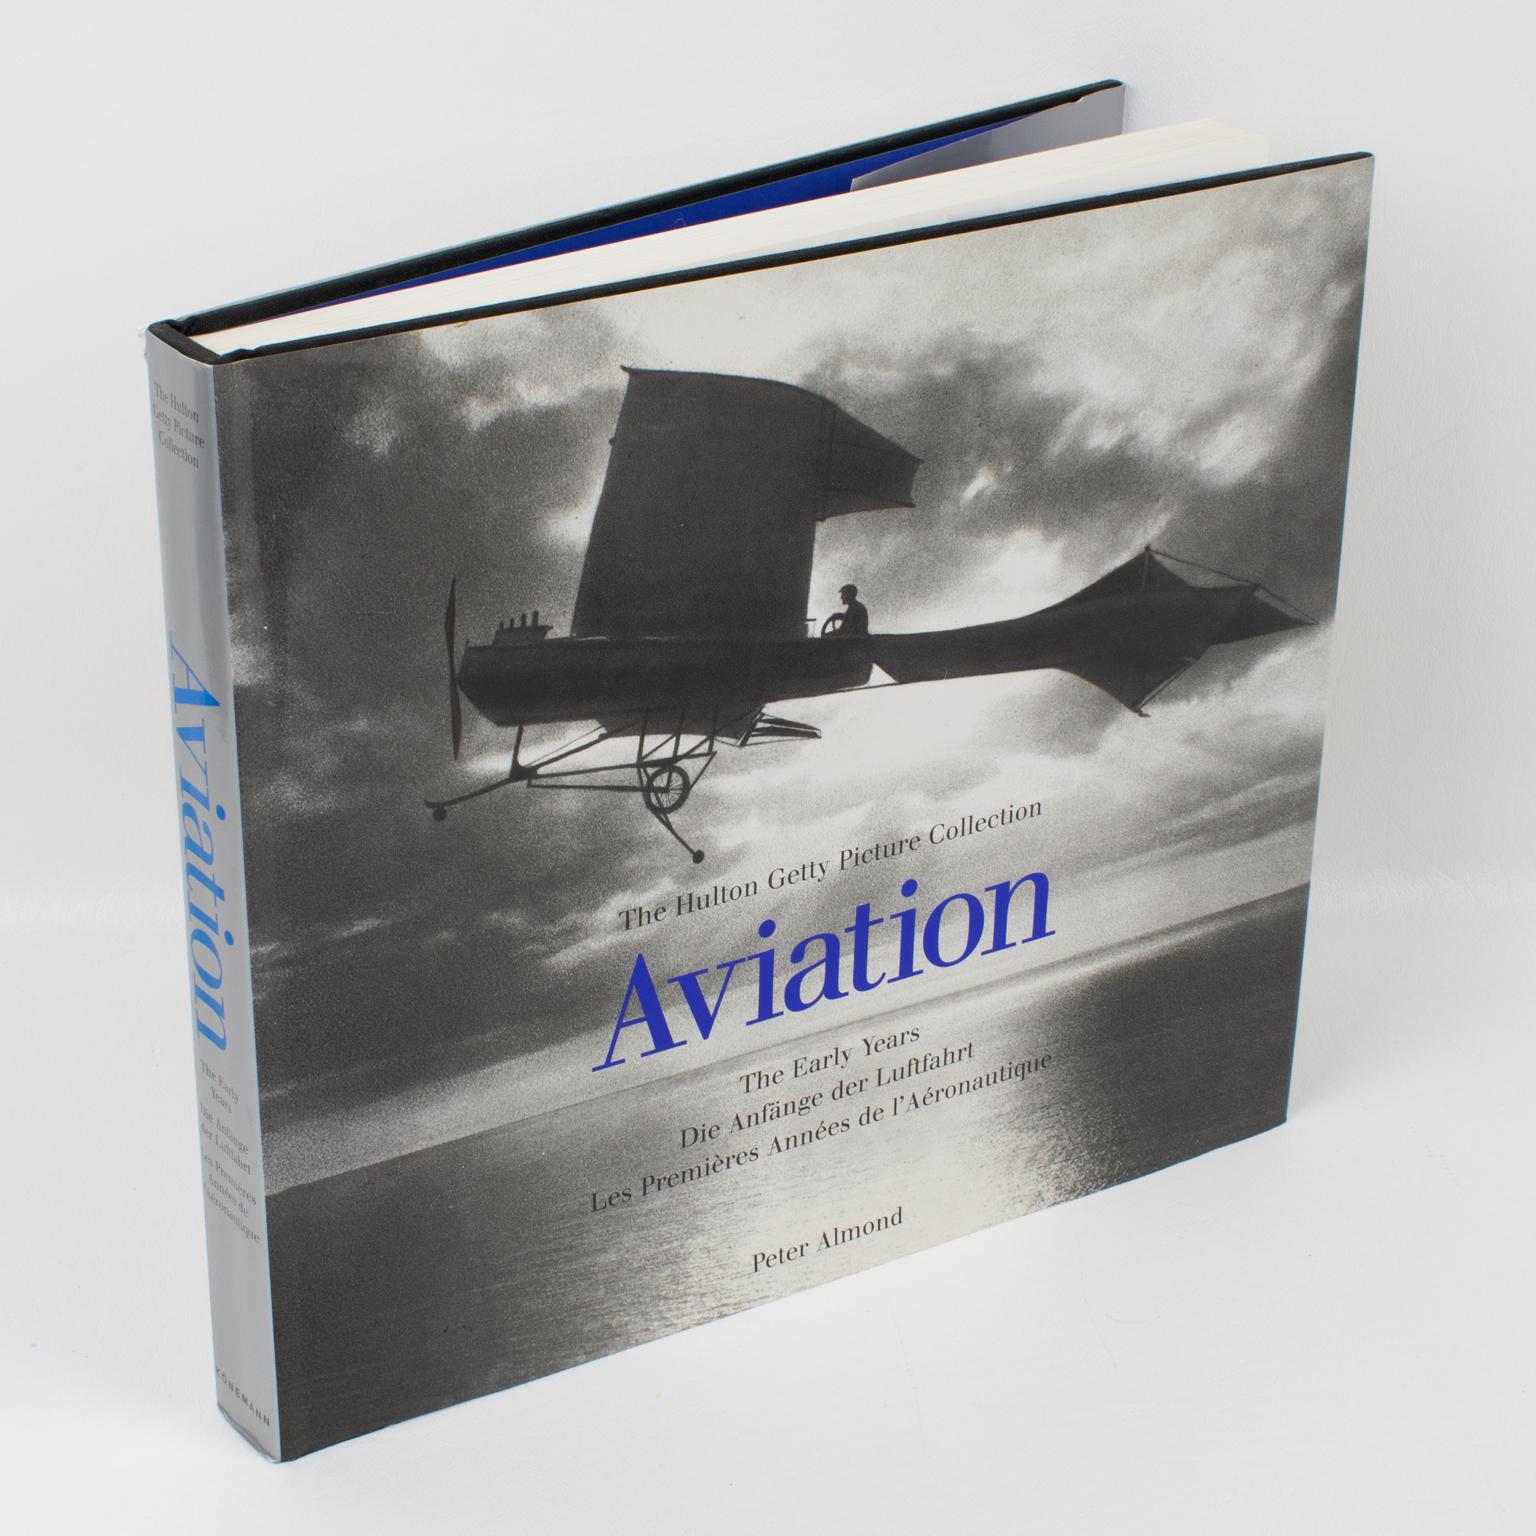 The Hulton Getty Picture Collection - Aviation, The Early Years Book, by Peter Almond, Editions 1997.
Aviation chronicles the first years of man-powered flight in photographs, from the end of the last century to the era of the great Zeppelins.